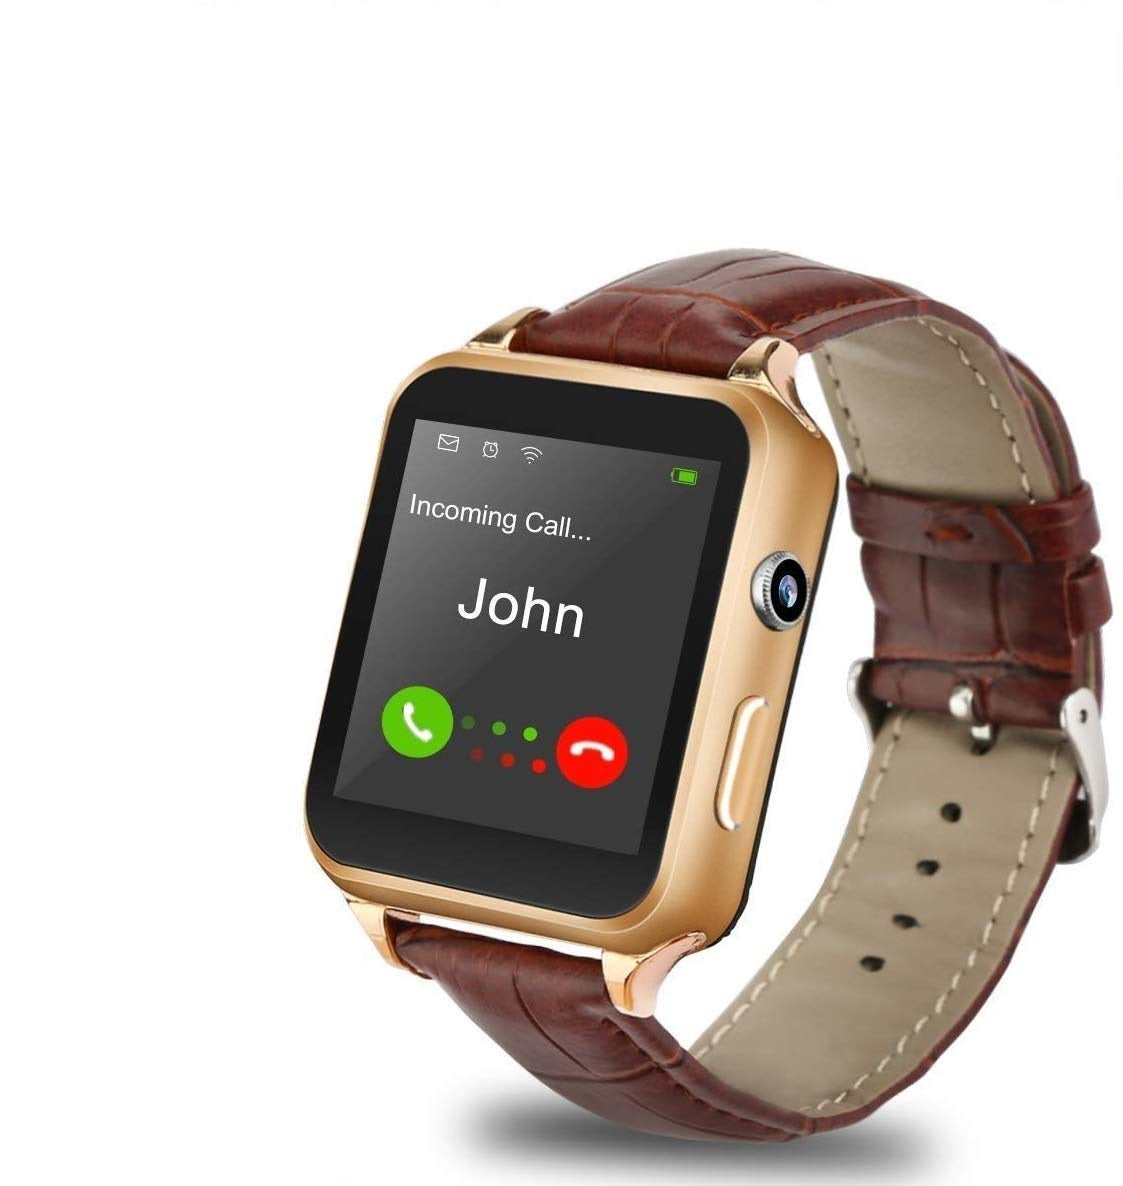 Smartwatch Bluetooth Deluxe Executive Android / iOS (Multilingue) - GT08